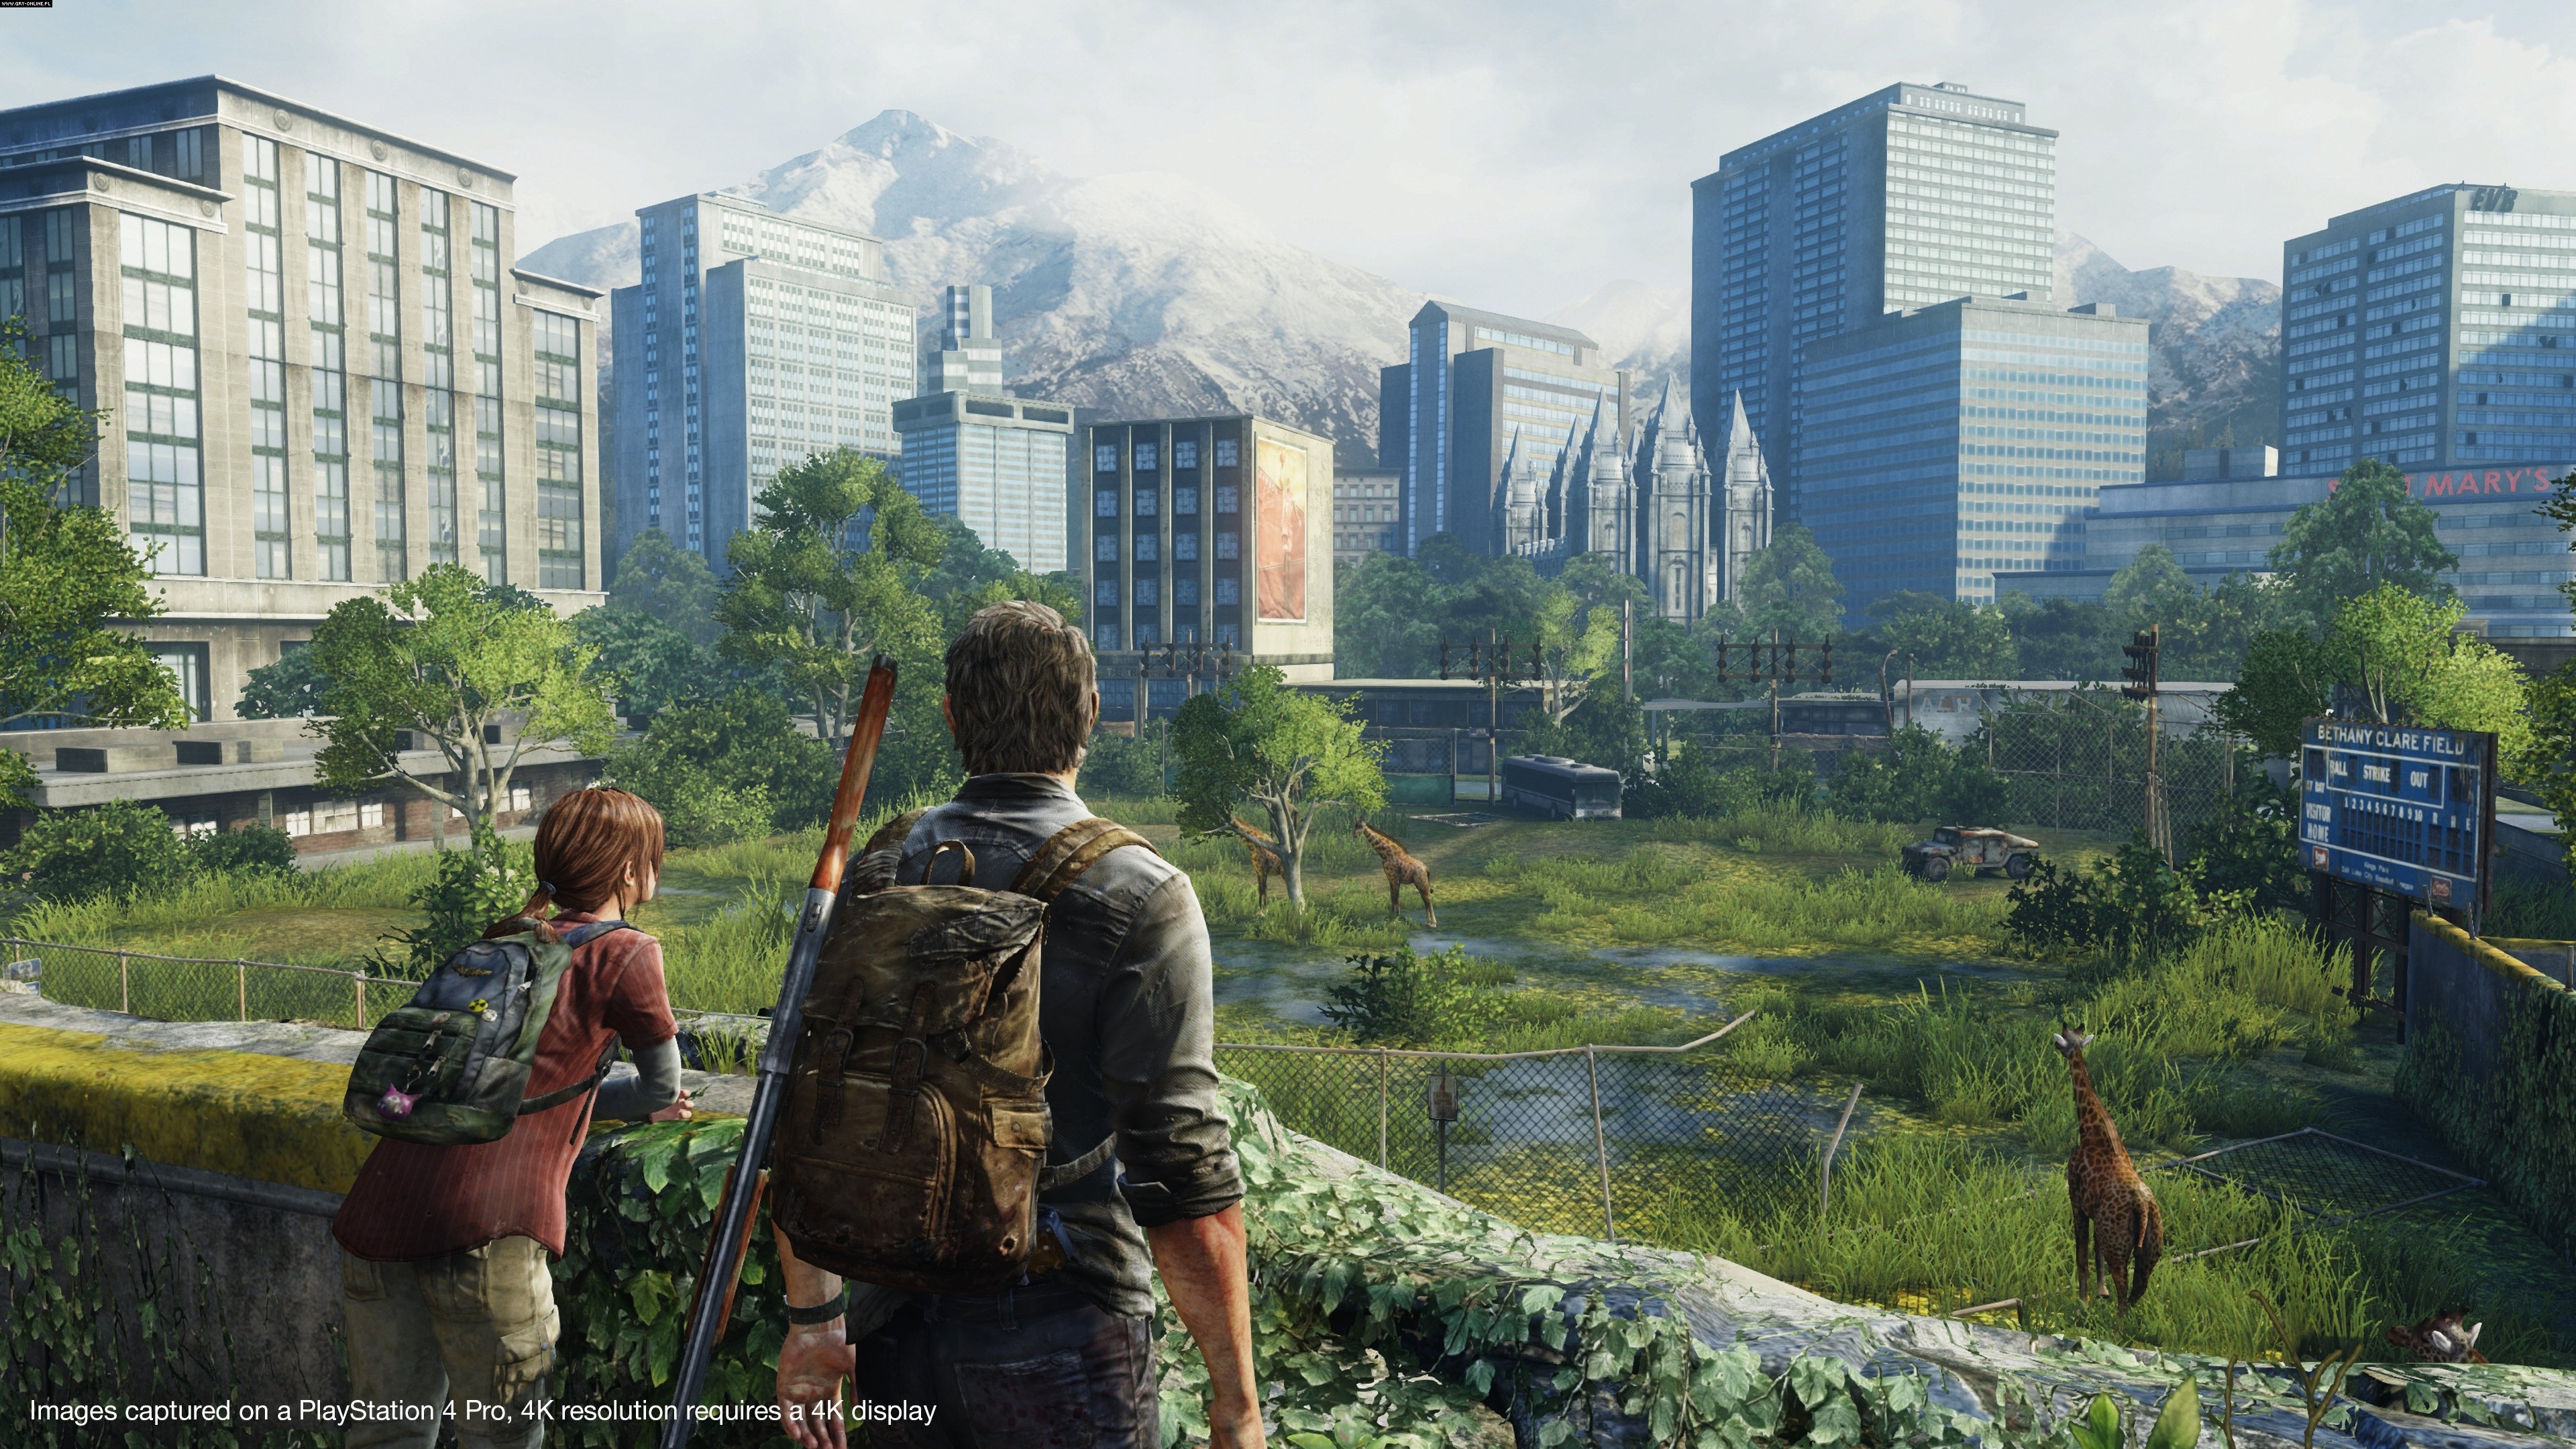 the last of us pc game download torrent